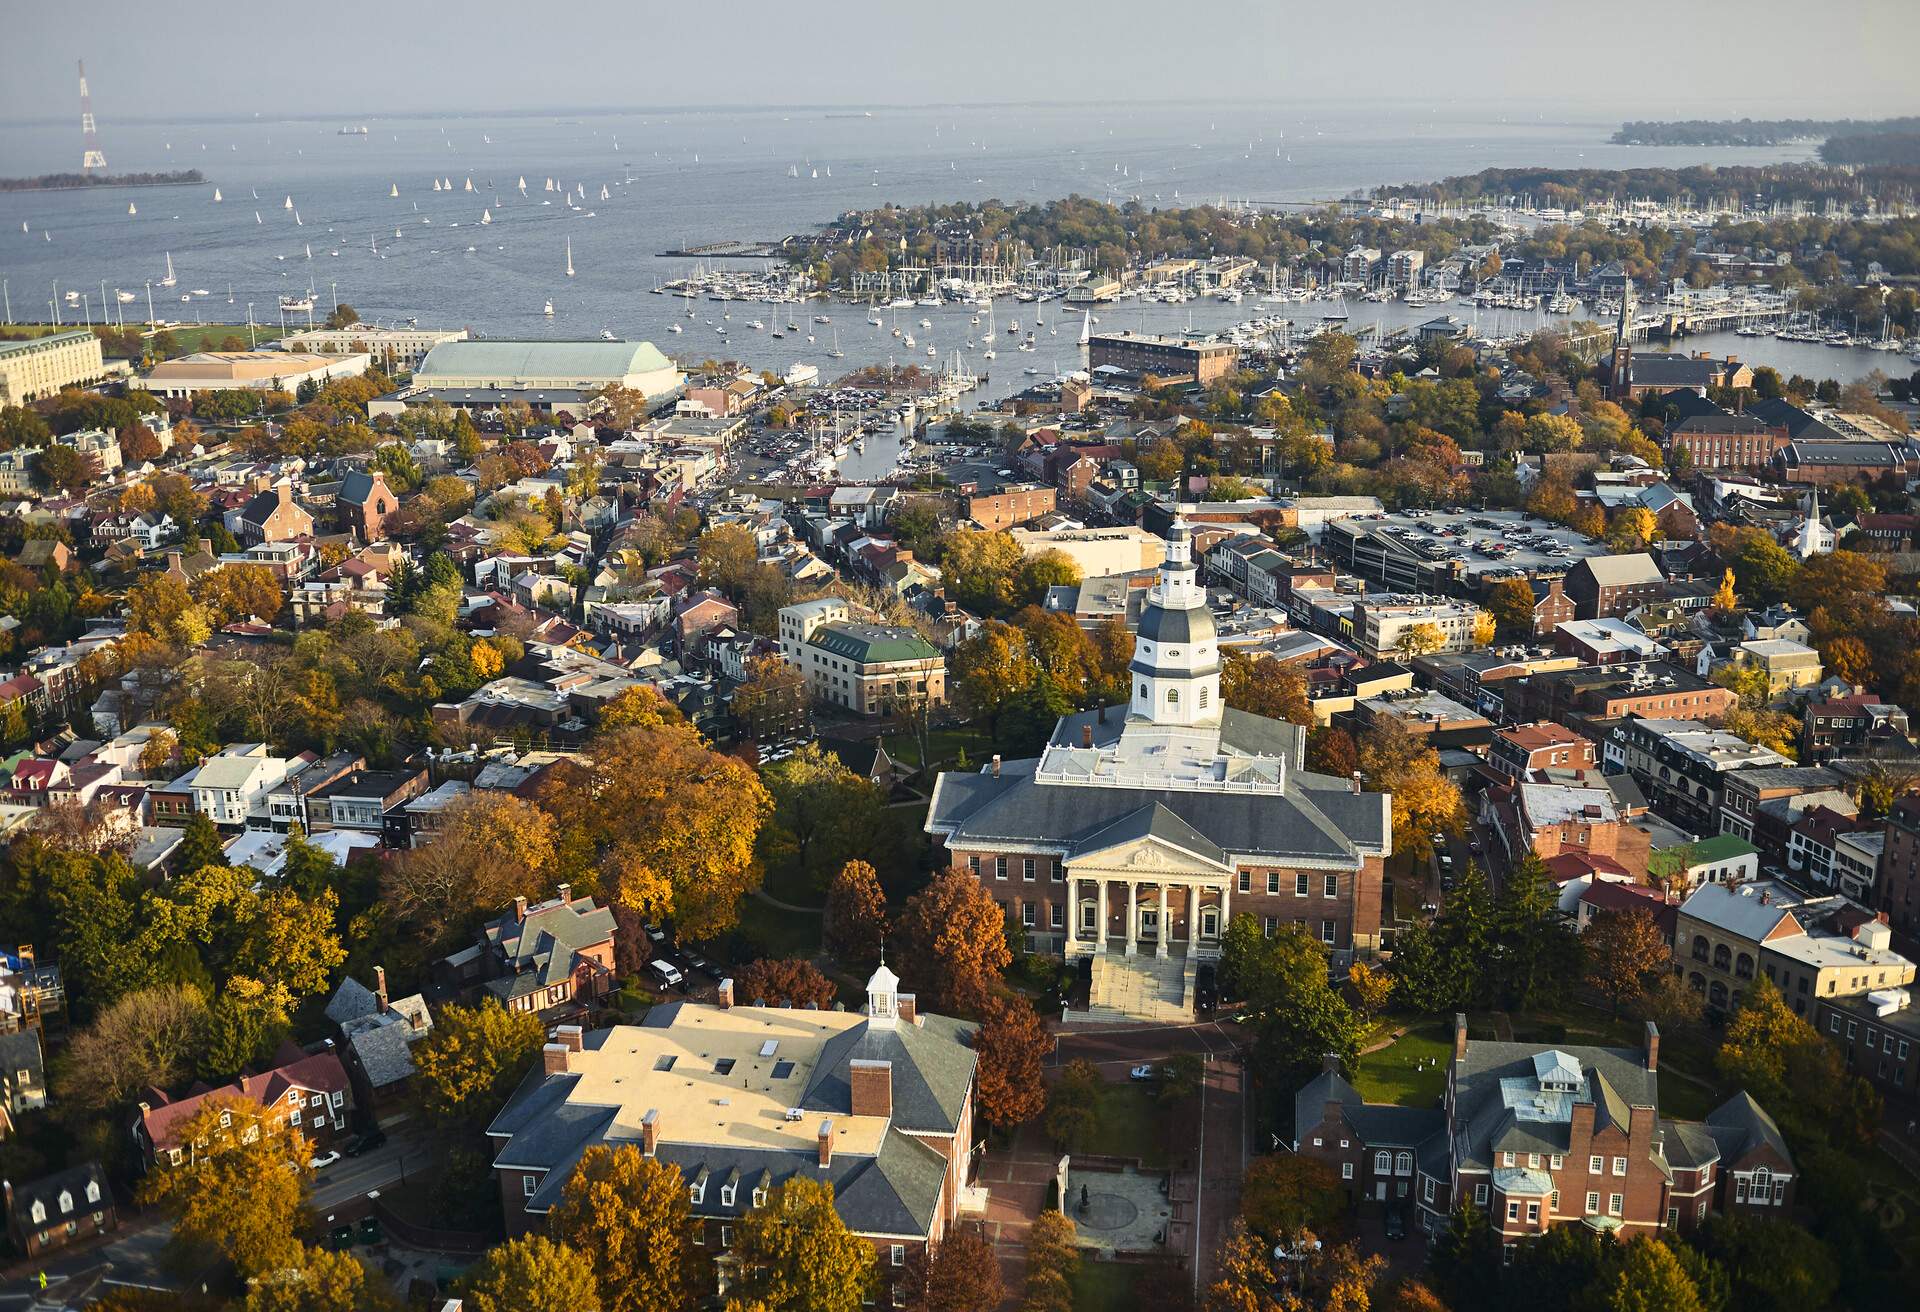 dest_usa_maryland_annapolis_state-house_capital_aerial_gettyimages-681897279_universal_within-usage-period_48371